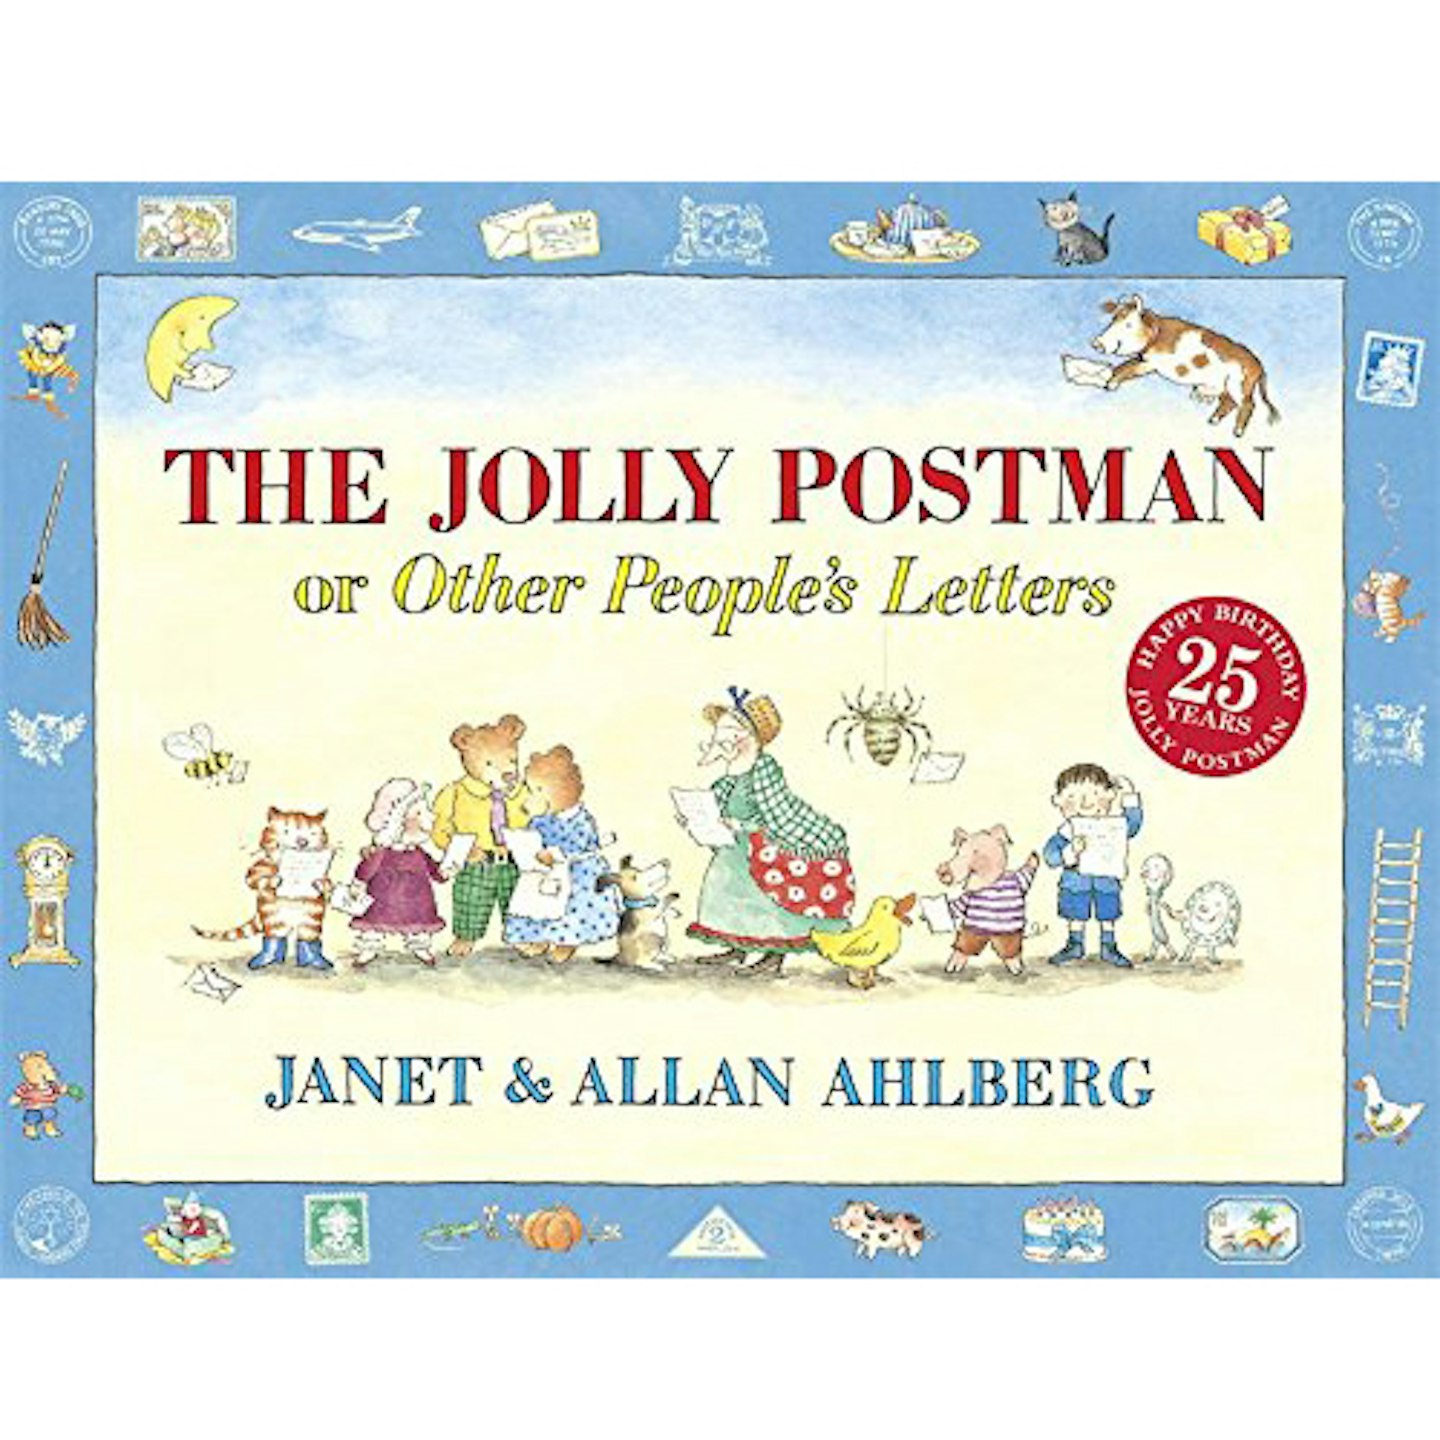 The Jolly Postman by Janet and Allan Ahlberg